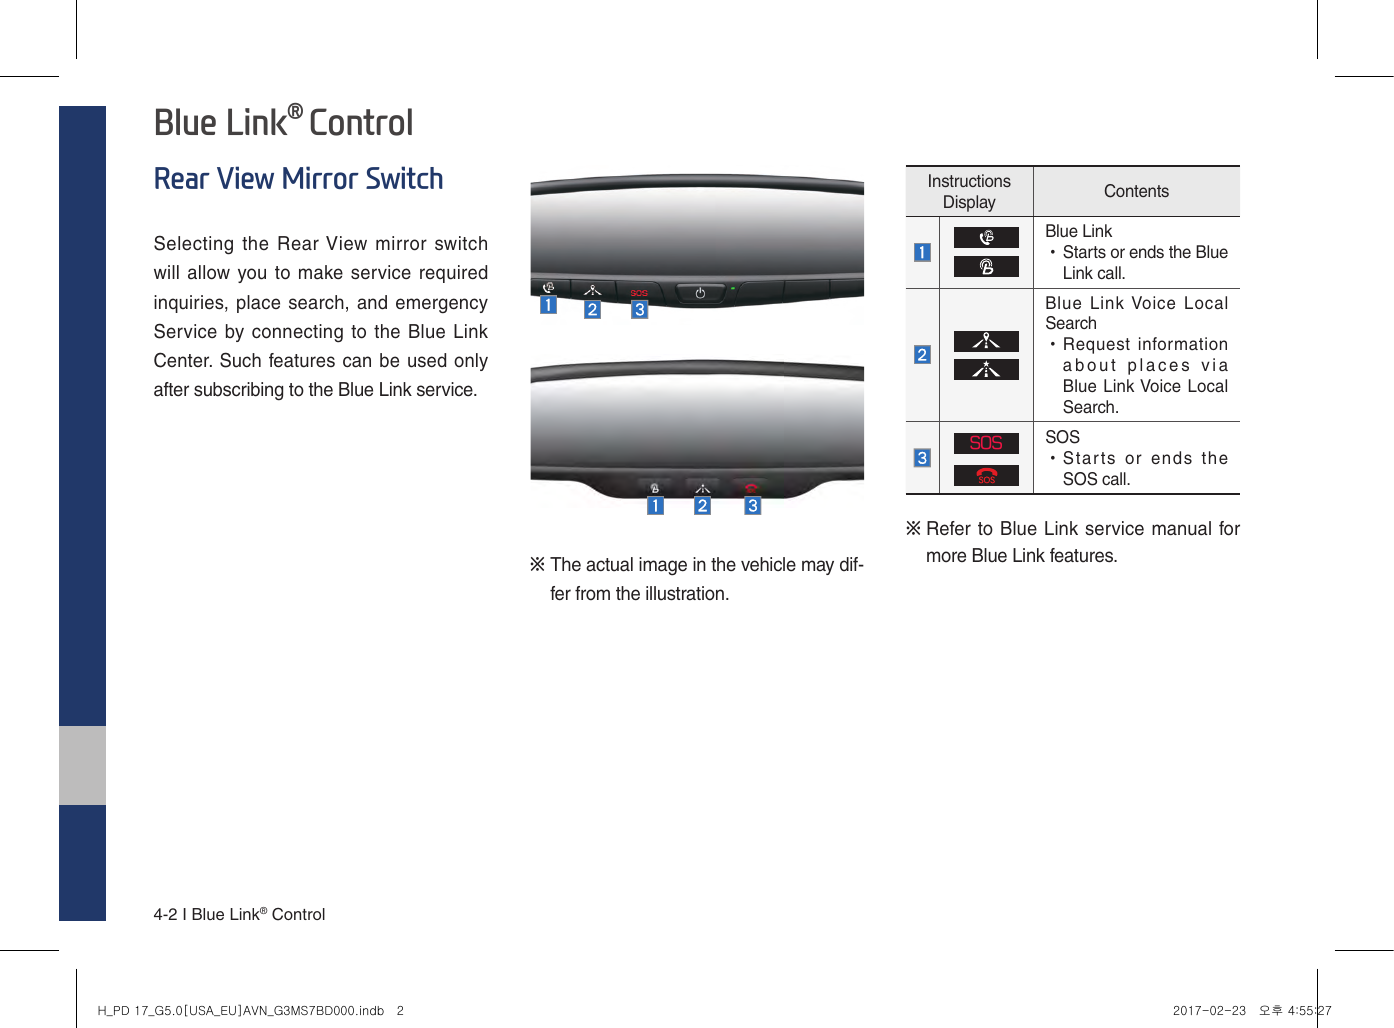 4-2 I Blue Link® ControlBlue Link® ControlRear View Mirror SwitchSelecting the  Rear View mirror switch will allow you to make service required inquiries, place search, and emergency Service by connecting to the Blue Link Center. Such features can be used only after subscribing to the Blue Link service.Instructions Display ContentsBlue Link •Starts or ends the Blue Link call.Blue  Link Voice  Local Search •Request information about  places  via  Blue Link Voice Local Search.SOSSOS •Starts  or  ends  the SOS call.※  Refer to Blue Link service manual for more Blue Link features.※  The actual image in the vehicle may dif-fer from the illustration.H_PD 17_G5.0[USA_EU]AVN_G3MS7BD000.indb   2 2017-02-23   오후 4:55:27